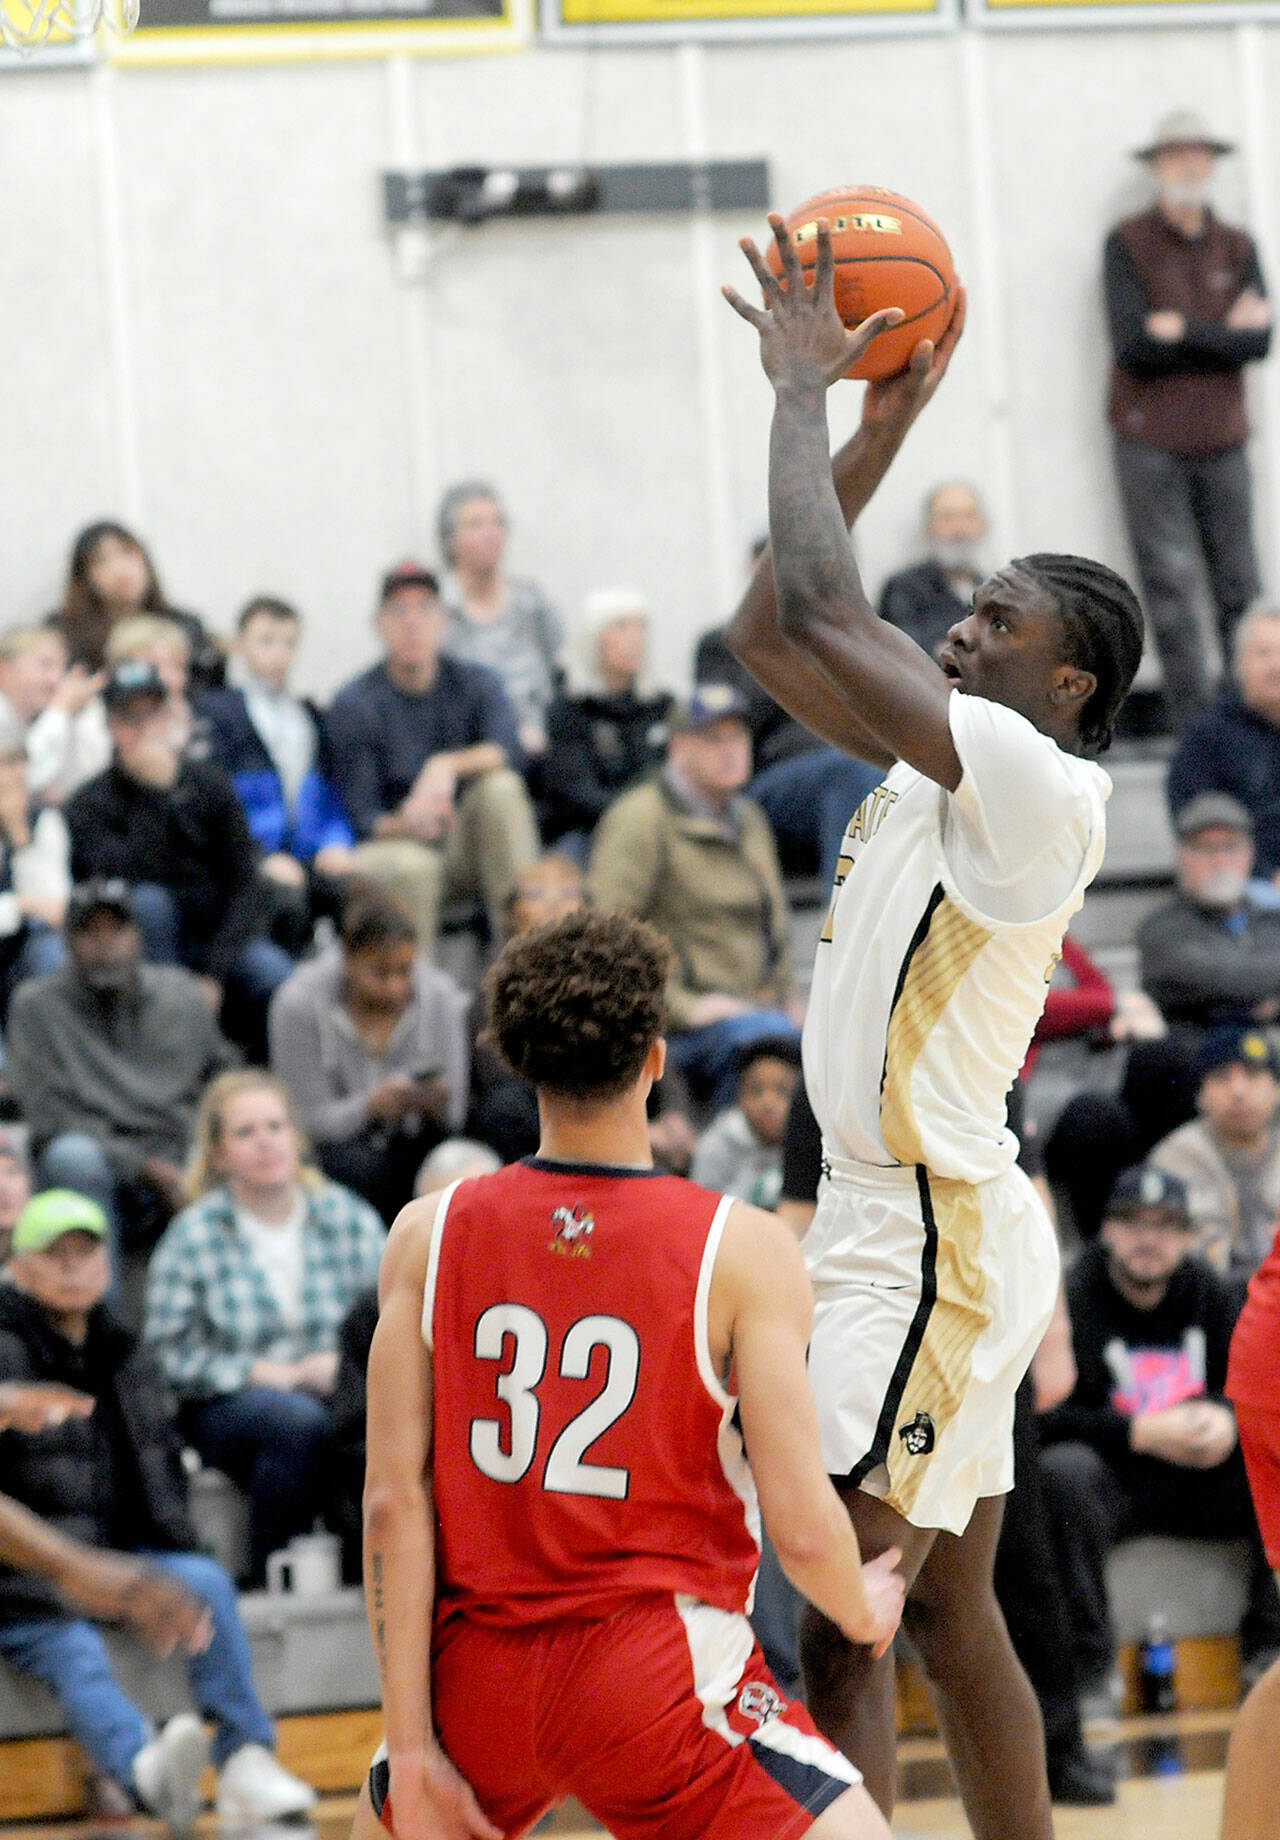 KEITH THORPE/PENINSULA DAILY NEWS
Peninsula's D'Ante Dean take aim at the basket as Skagit Valley's Jarron Quarles looks on during Wednesday's game at Peninsula College.